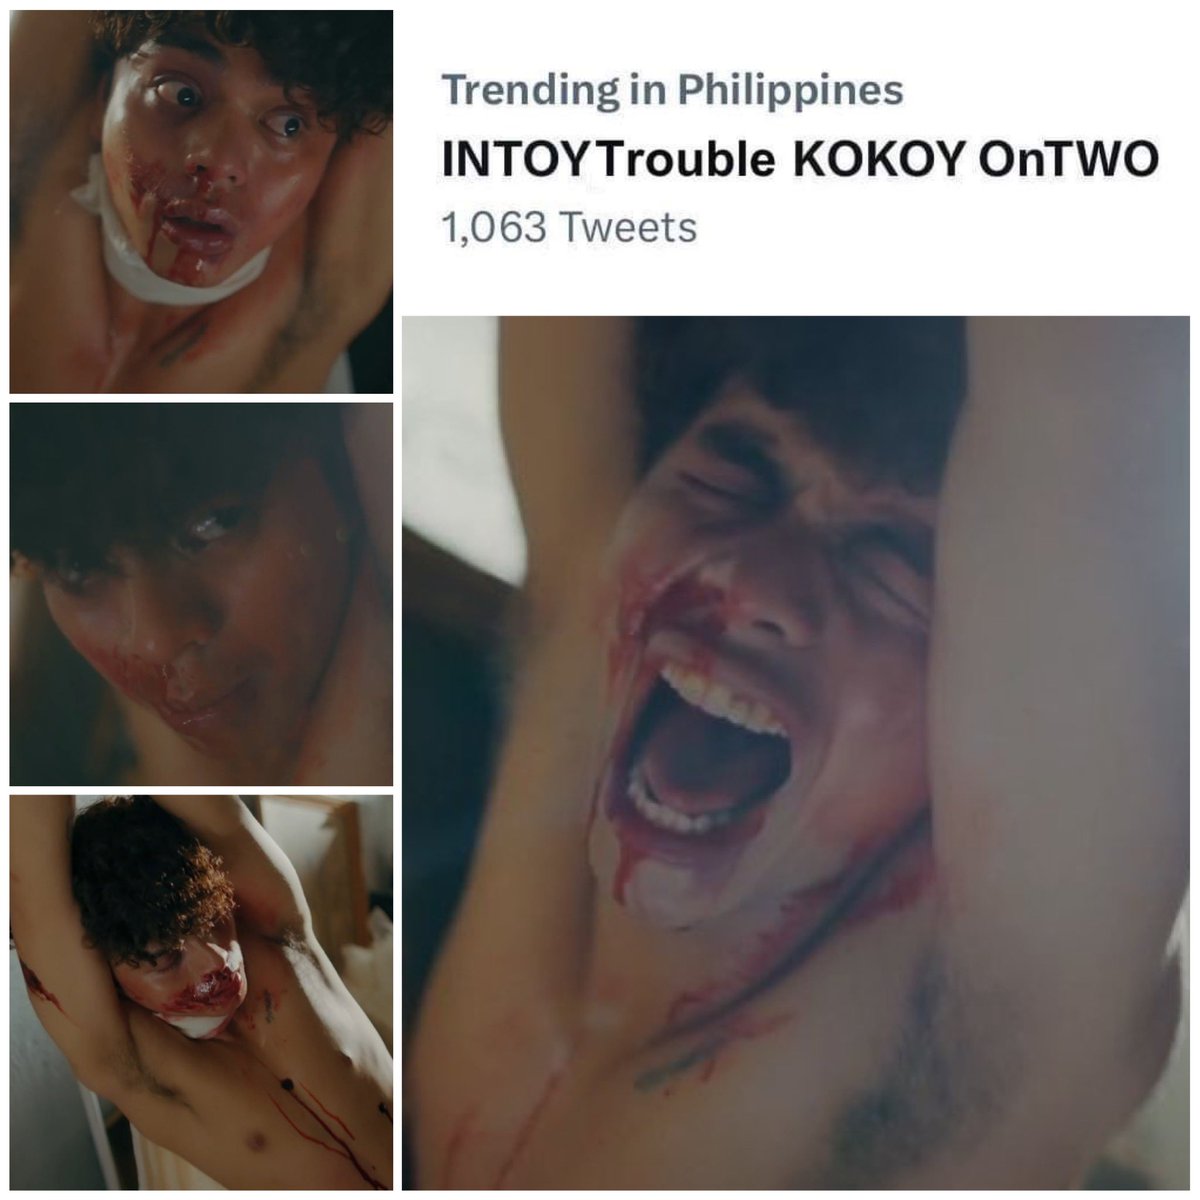 And incredible actor in a heartbreaking scene.

INTOYTrouble KOKOY OnTWO
#TWOKillLiam

@kkydsnts #KokoyDeSantos
@GMA_PA #TheWriteOne